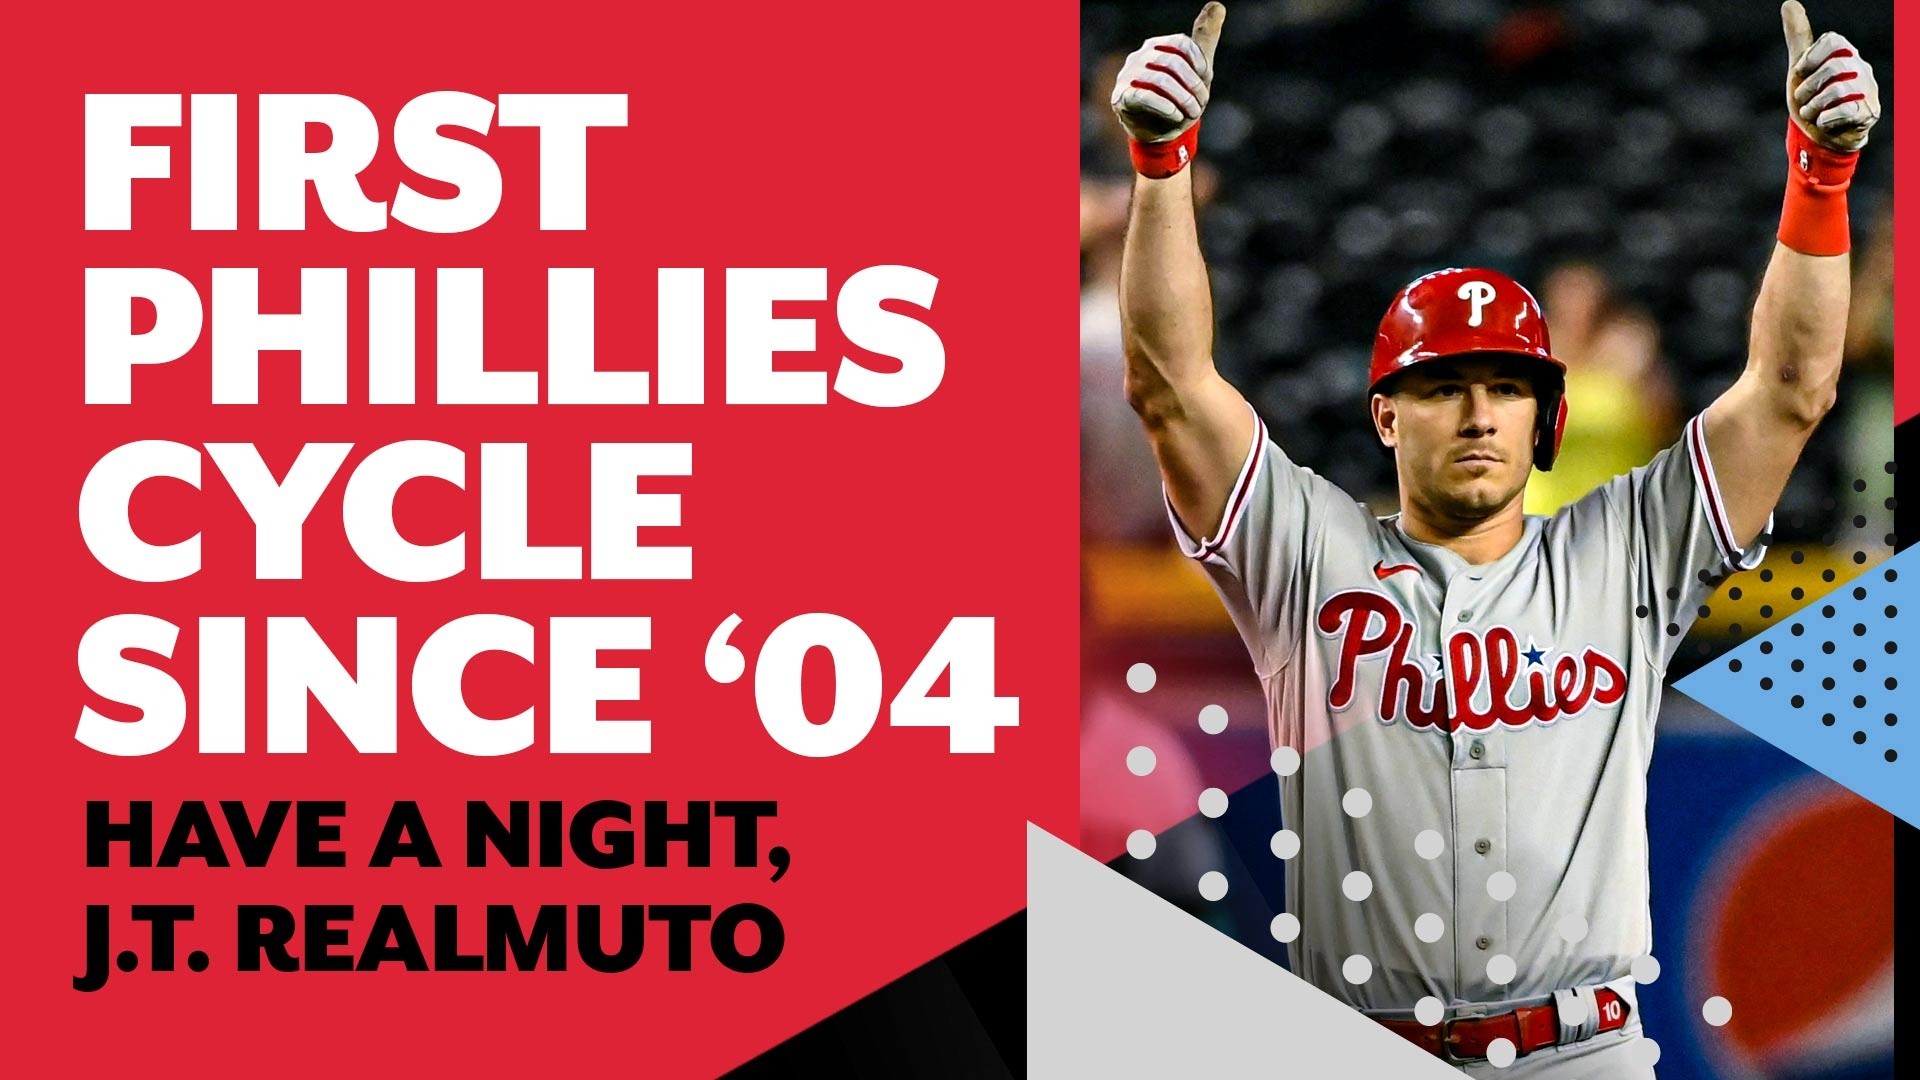 J.T. Realmuto closer to return for Phillies